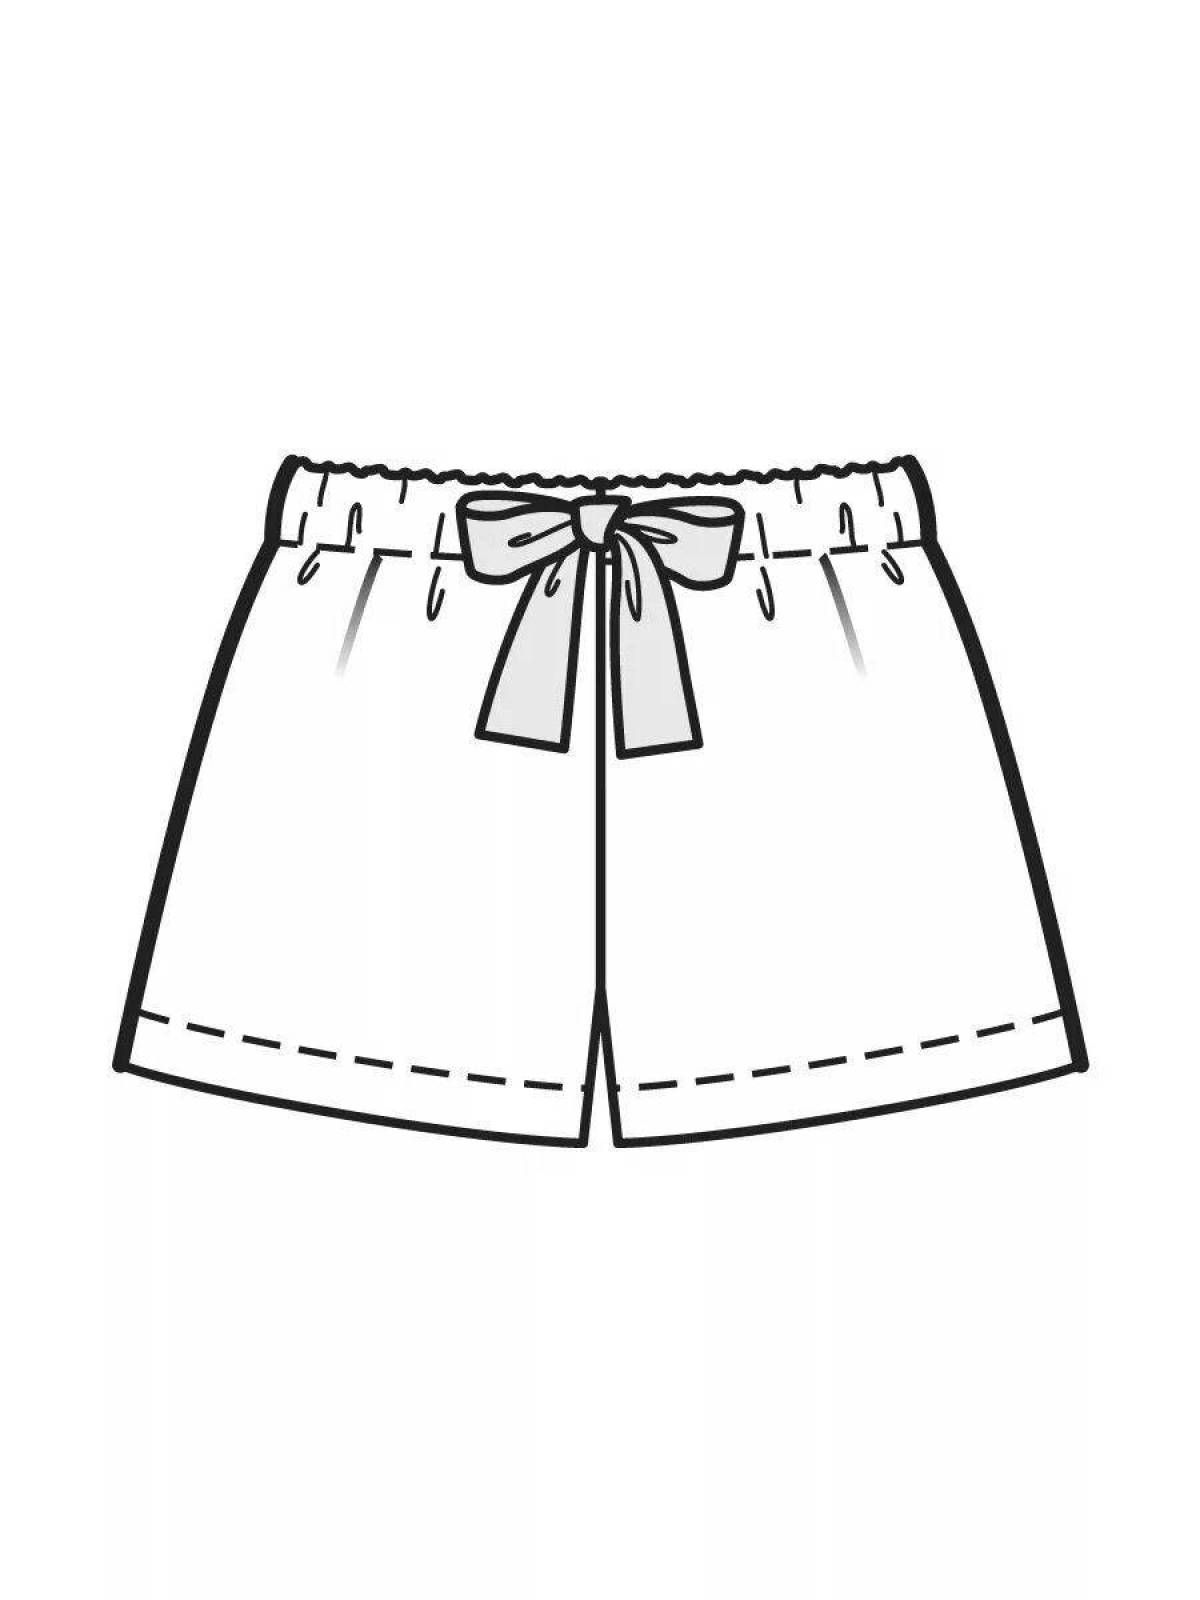 Cute baby shorts coloring page